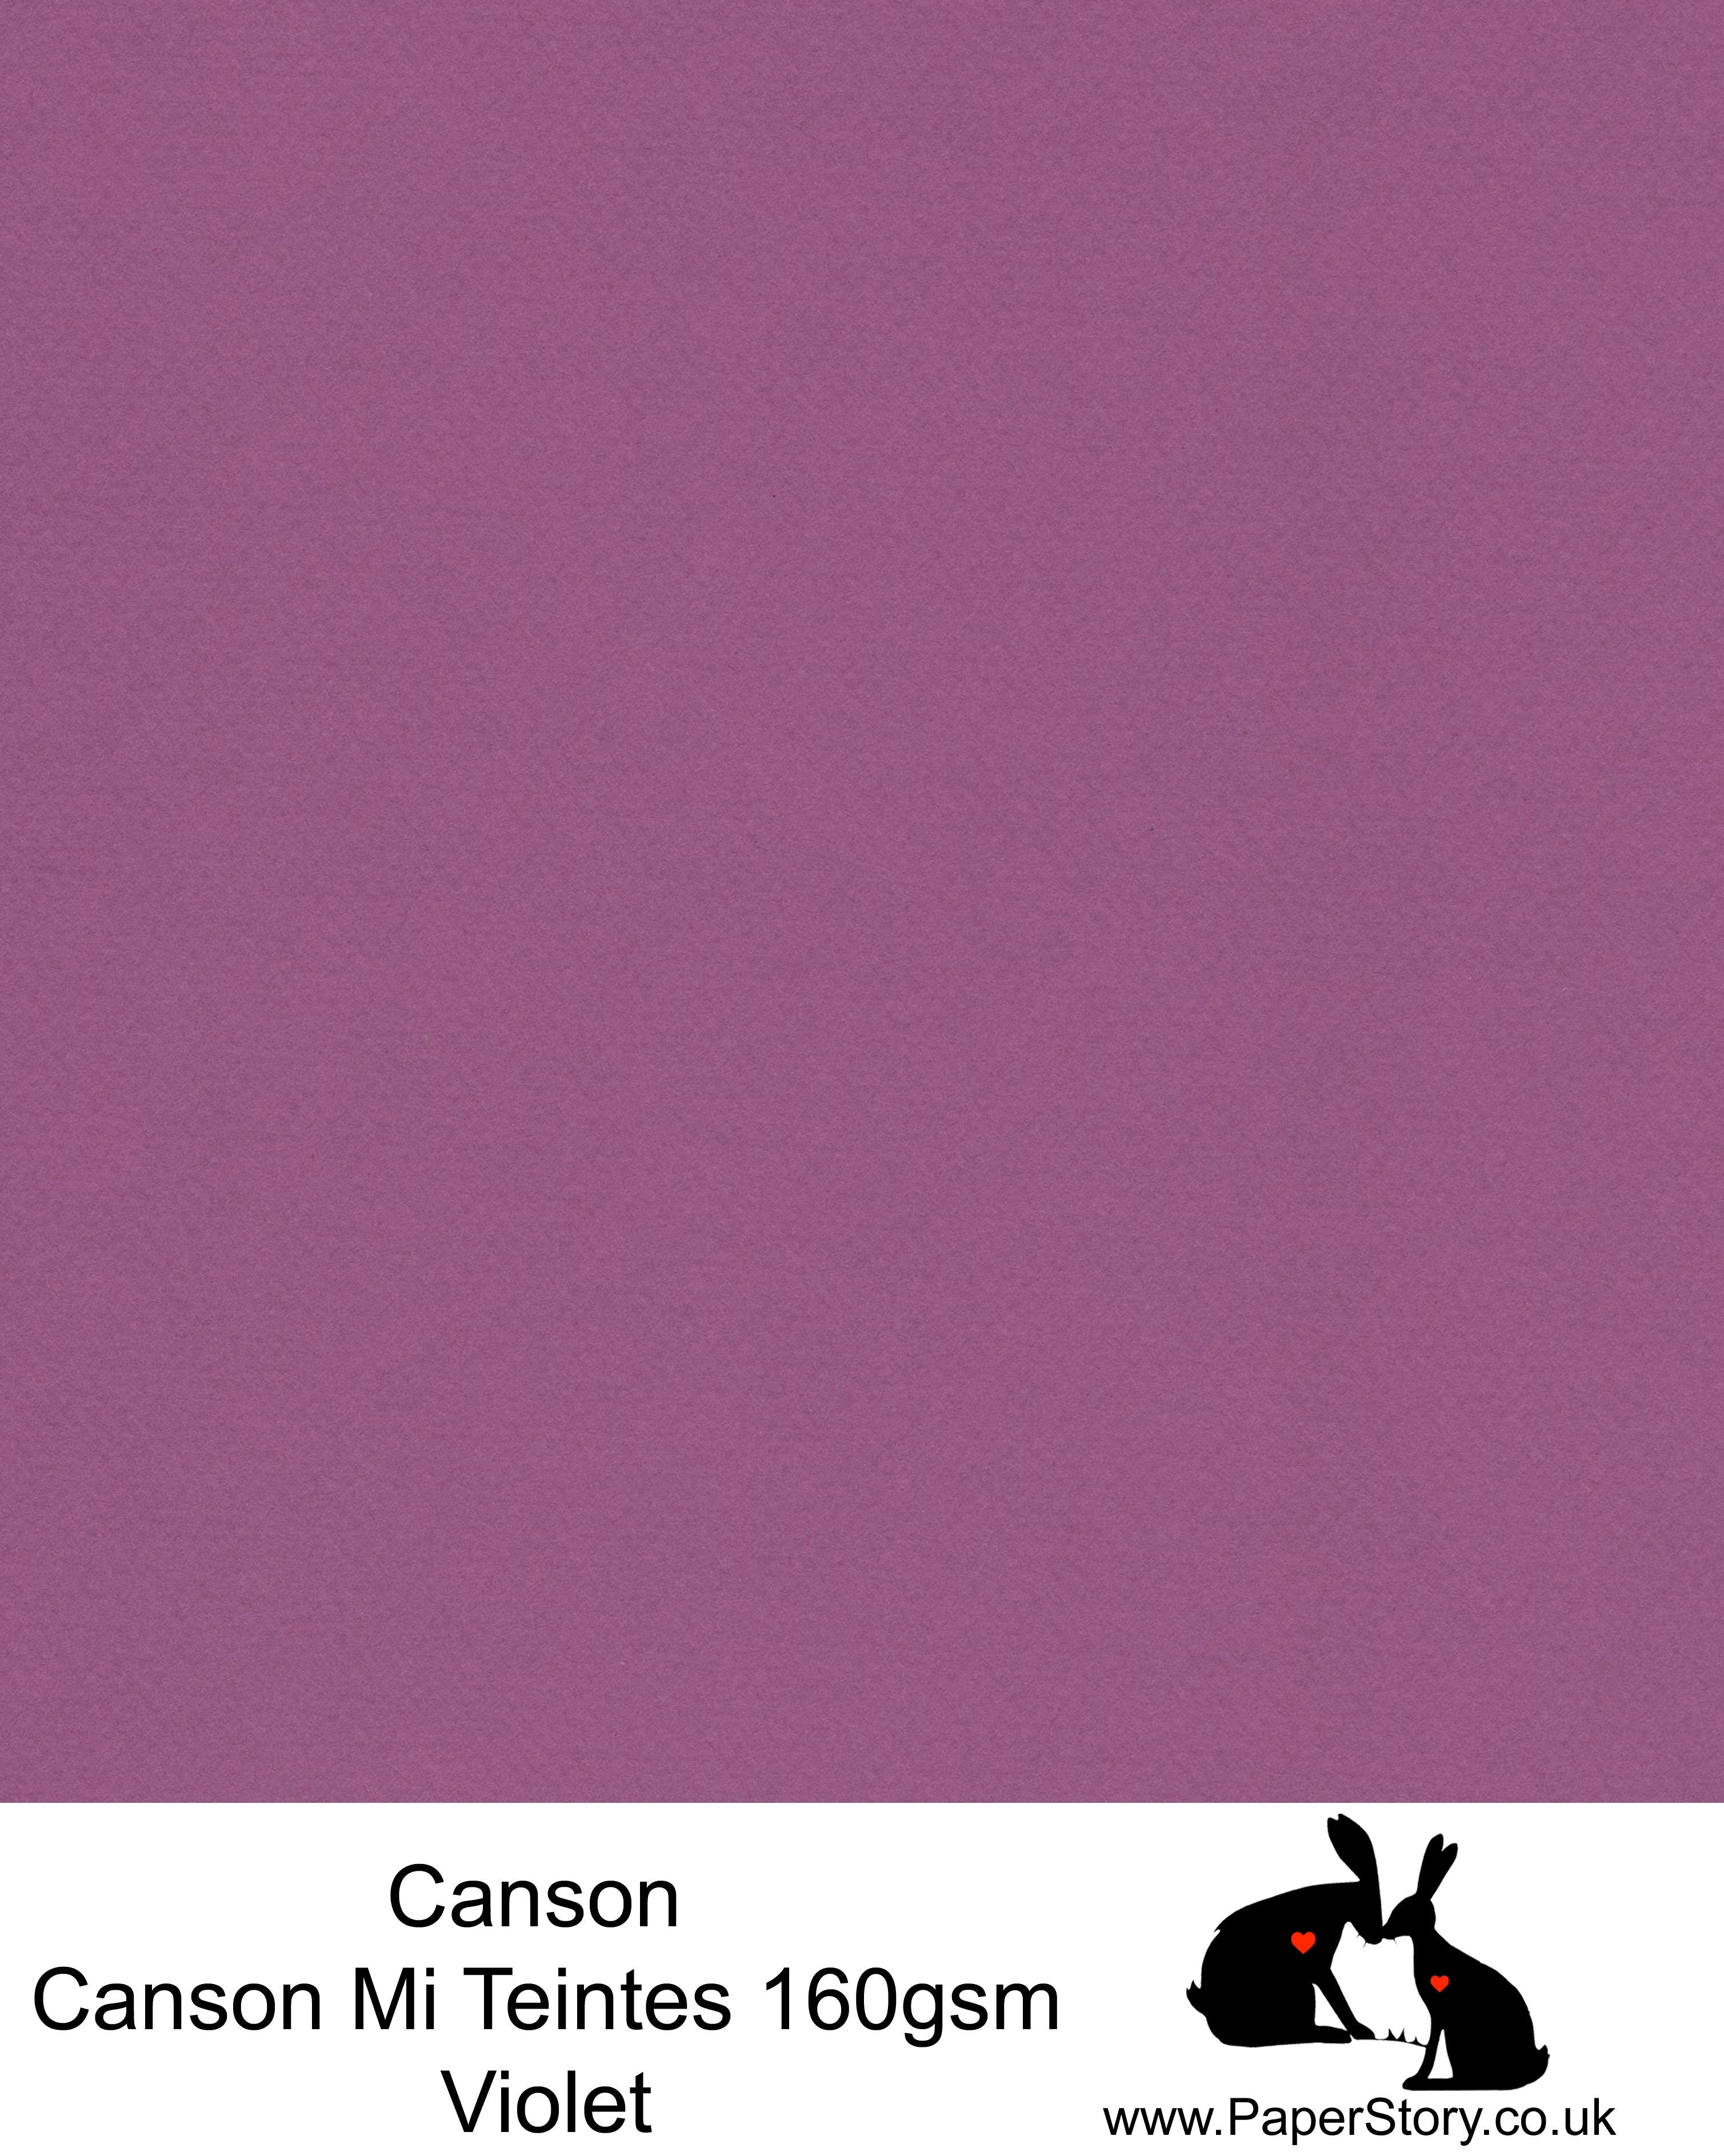 Canson Mi Teintes acid free, Violet purple pink hammered texture honeycomb surface paper 160 gsm. This is a popular and classic paper for all artists especially well respected for Pastel  and Papercutting made famous by Paper Panda. This paper has a honeycombed finish one side and fine grain the other. An authentic art paper, acid free with a  very high 50% cotton content. Canson Mi-Teintes complies with the ISO 9706 standard on permanence, a guarantee of excellent conservation 